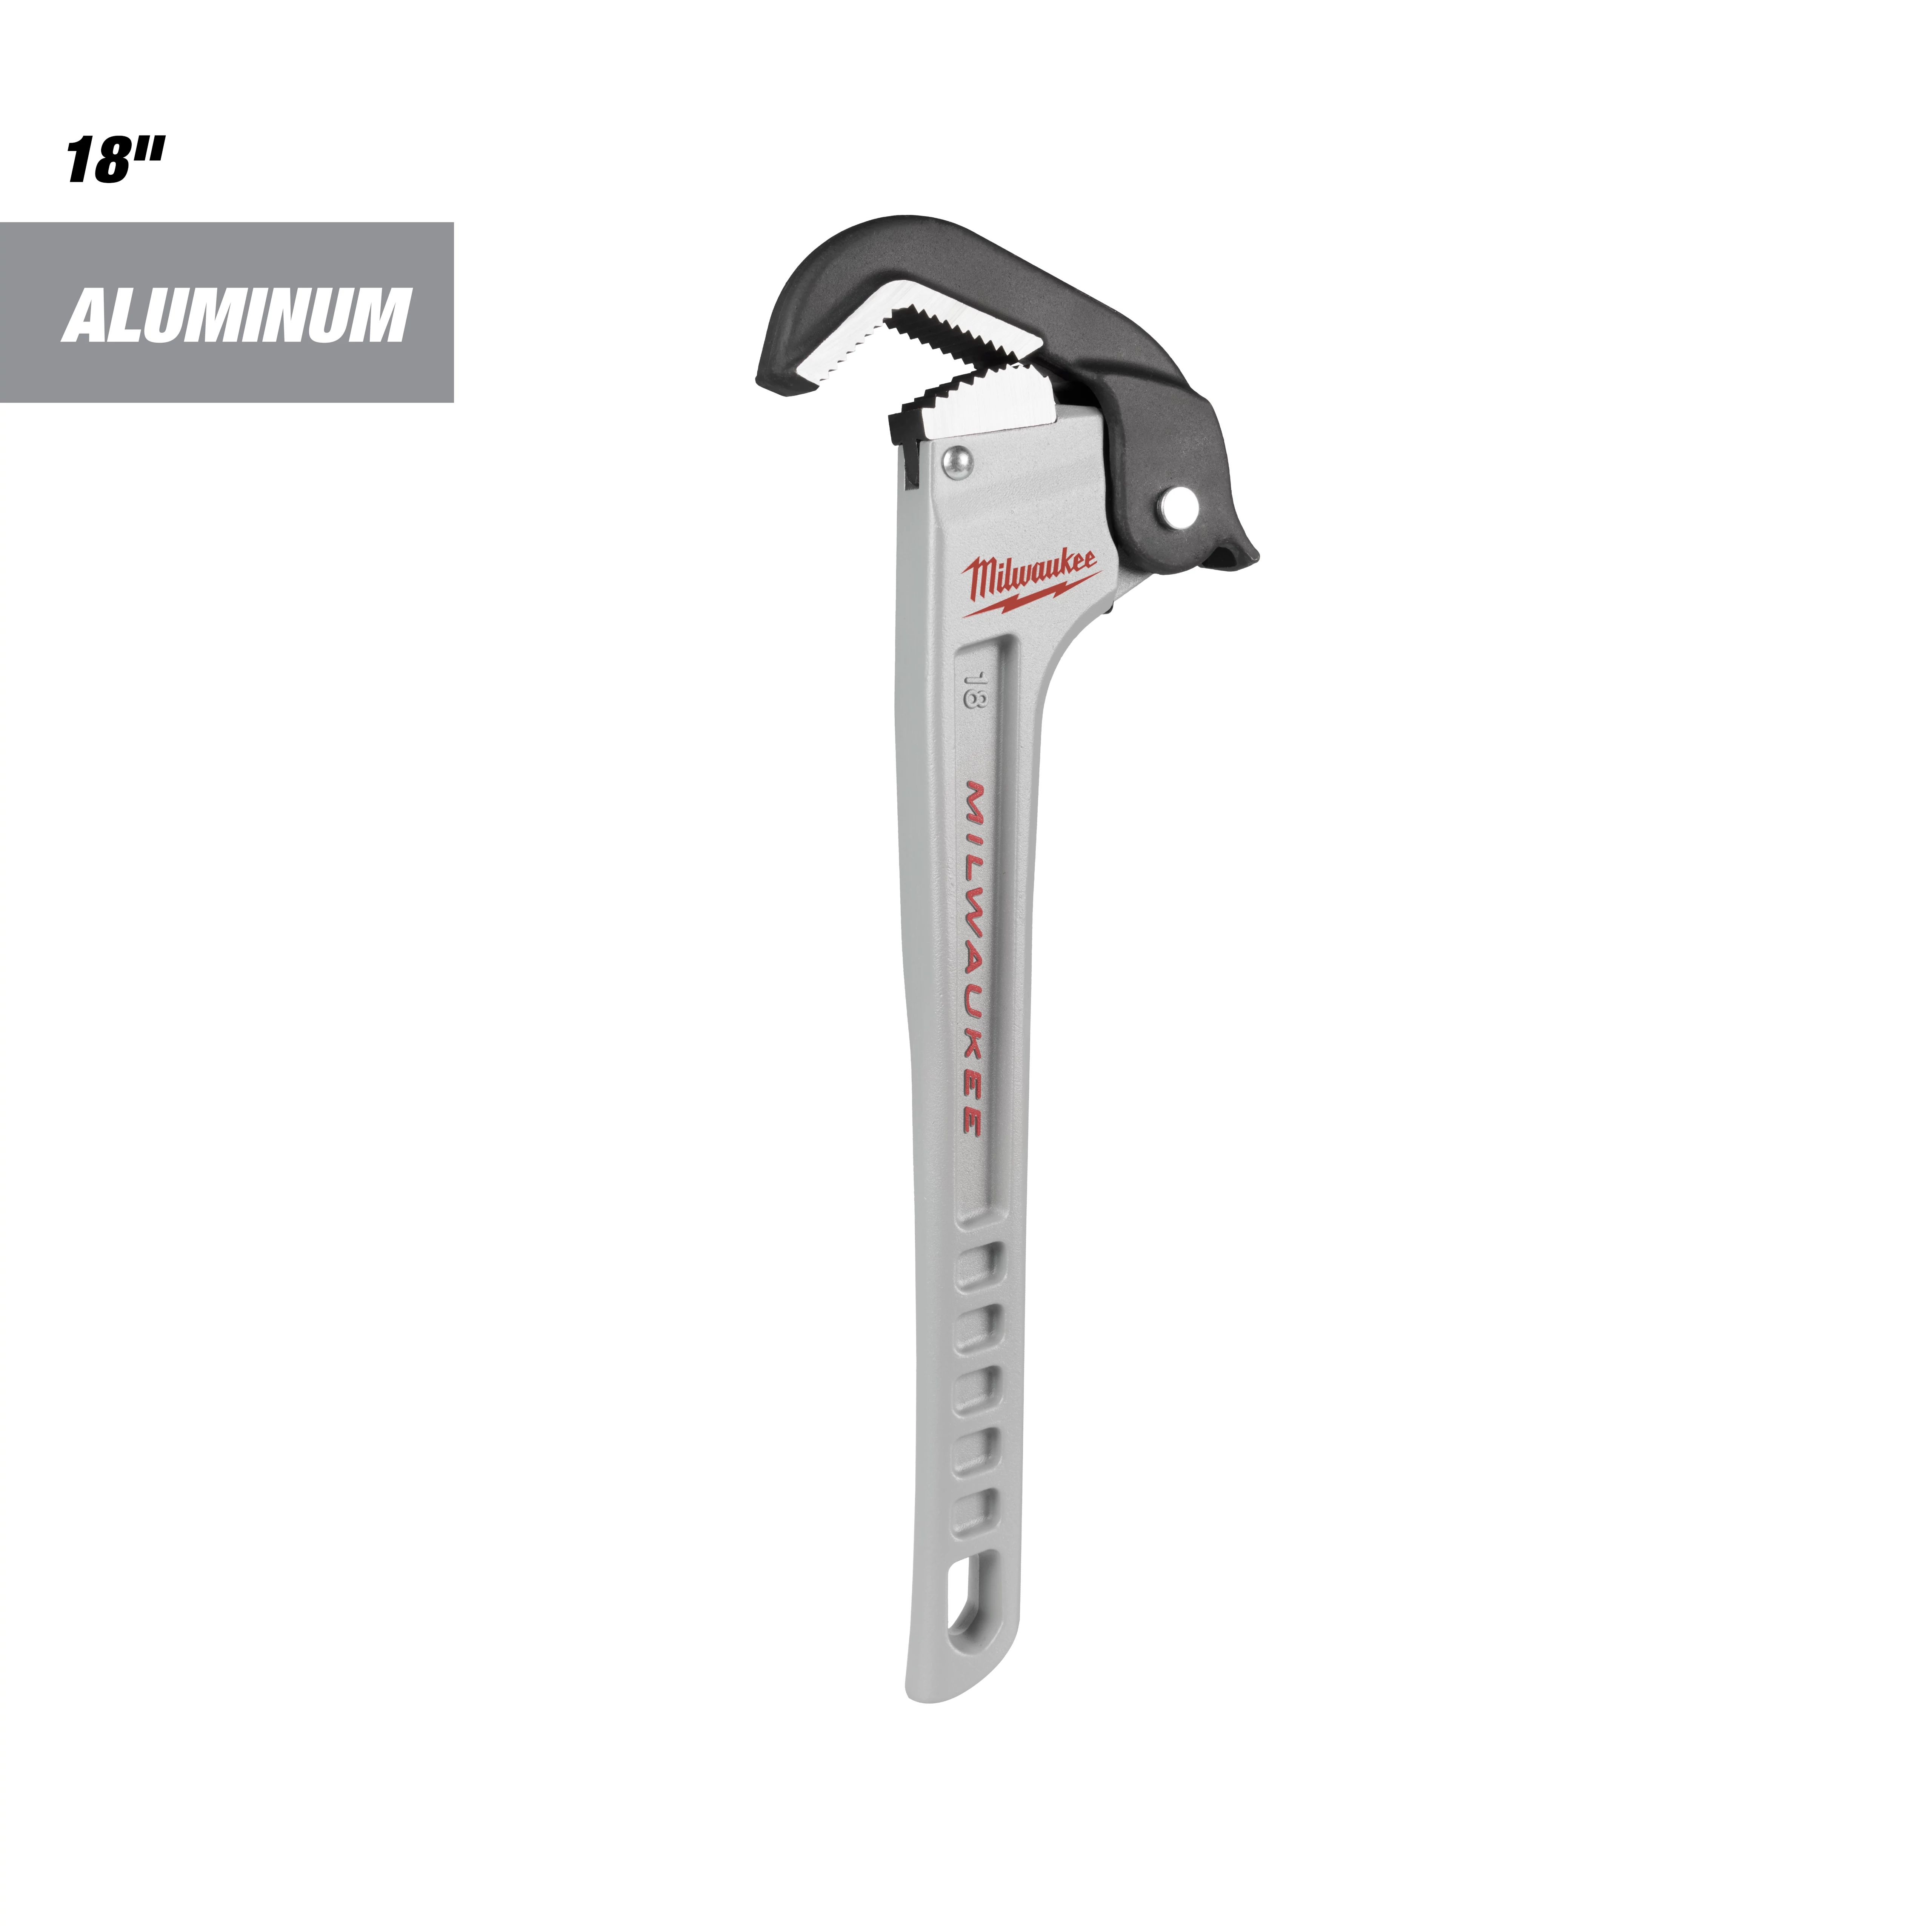 Aluminum Self-Adjusting Pipe Wrenches - 18"